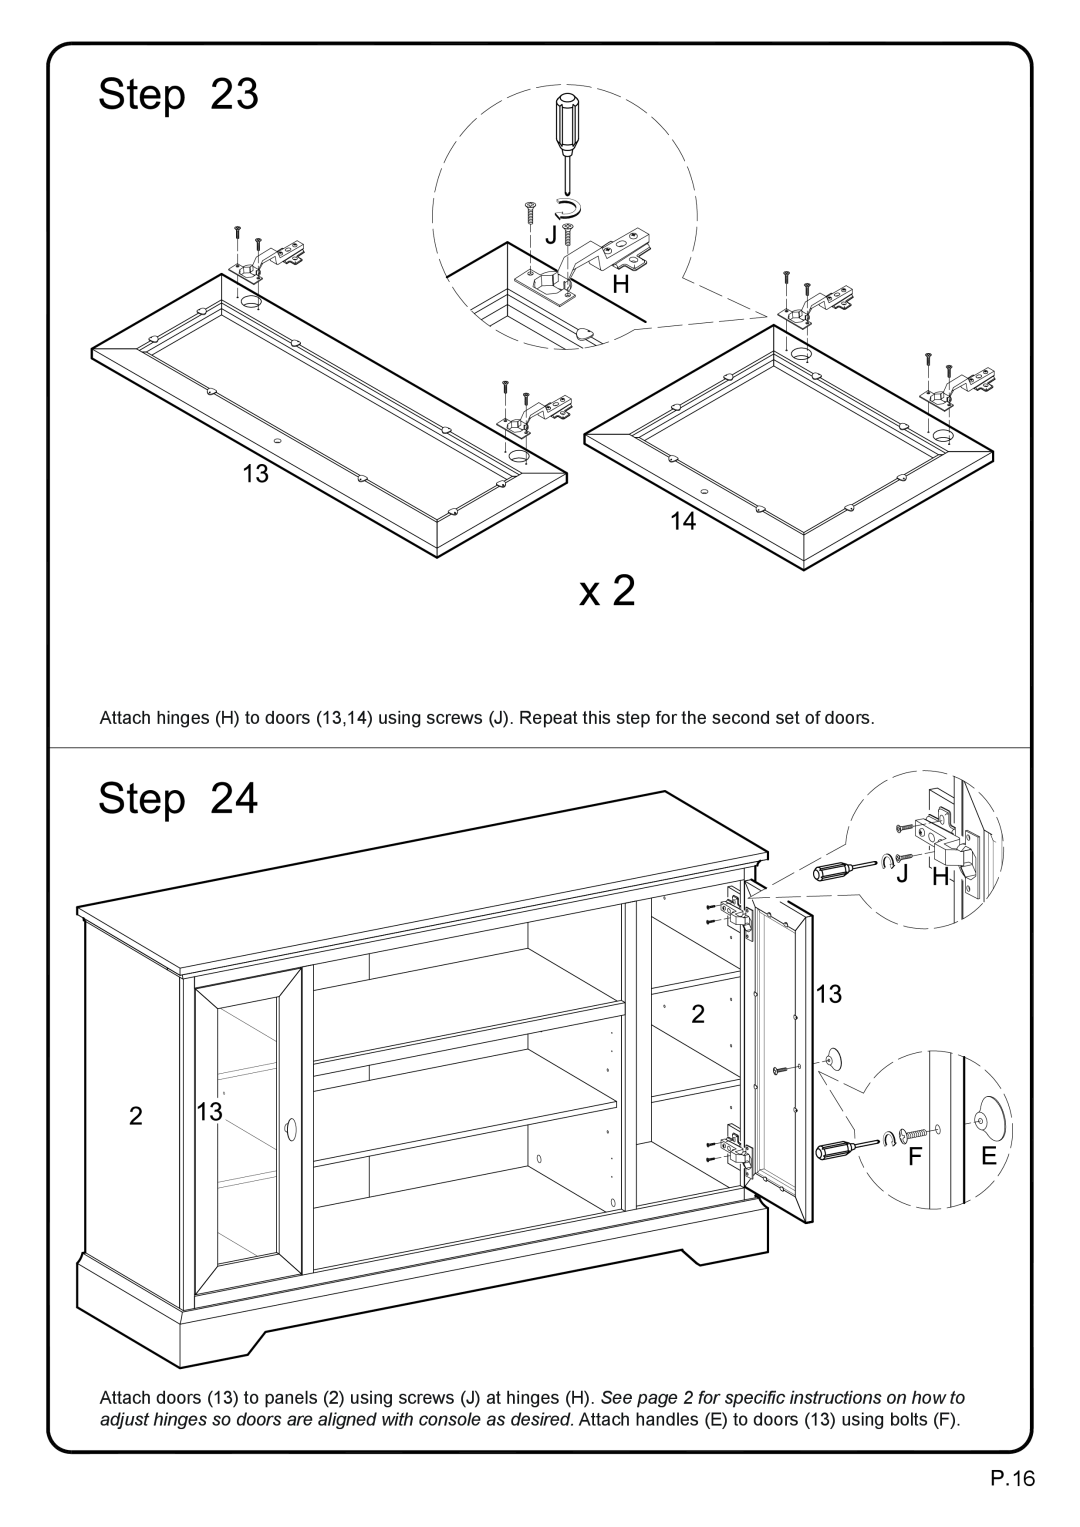 Walker W52C32BL manual Attach hinges H to doors 13,14 using screws J. Repeat this step for the second set of doors 